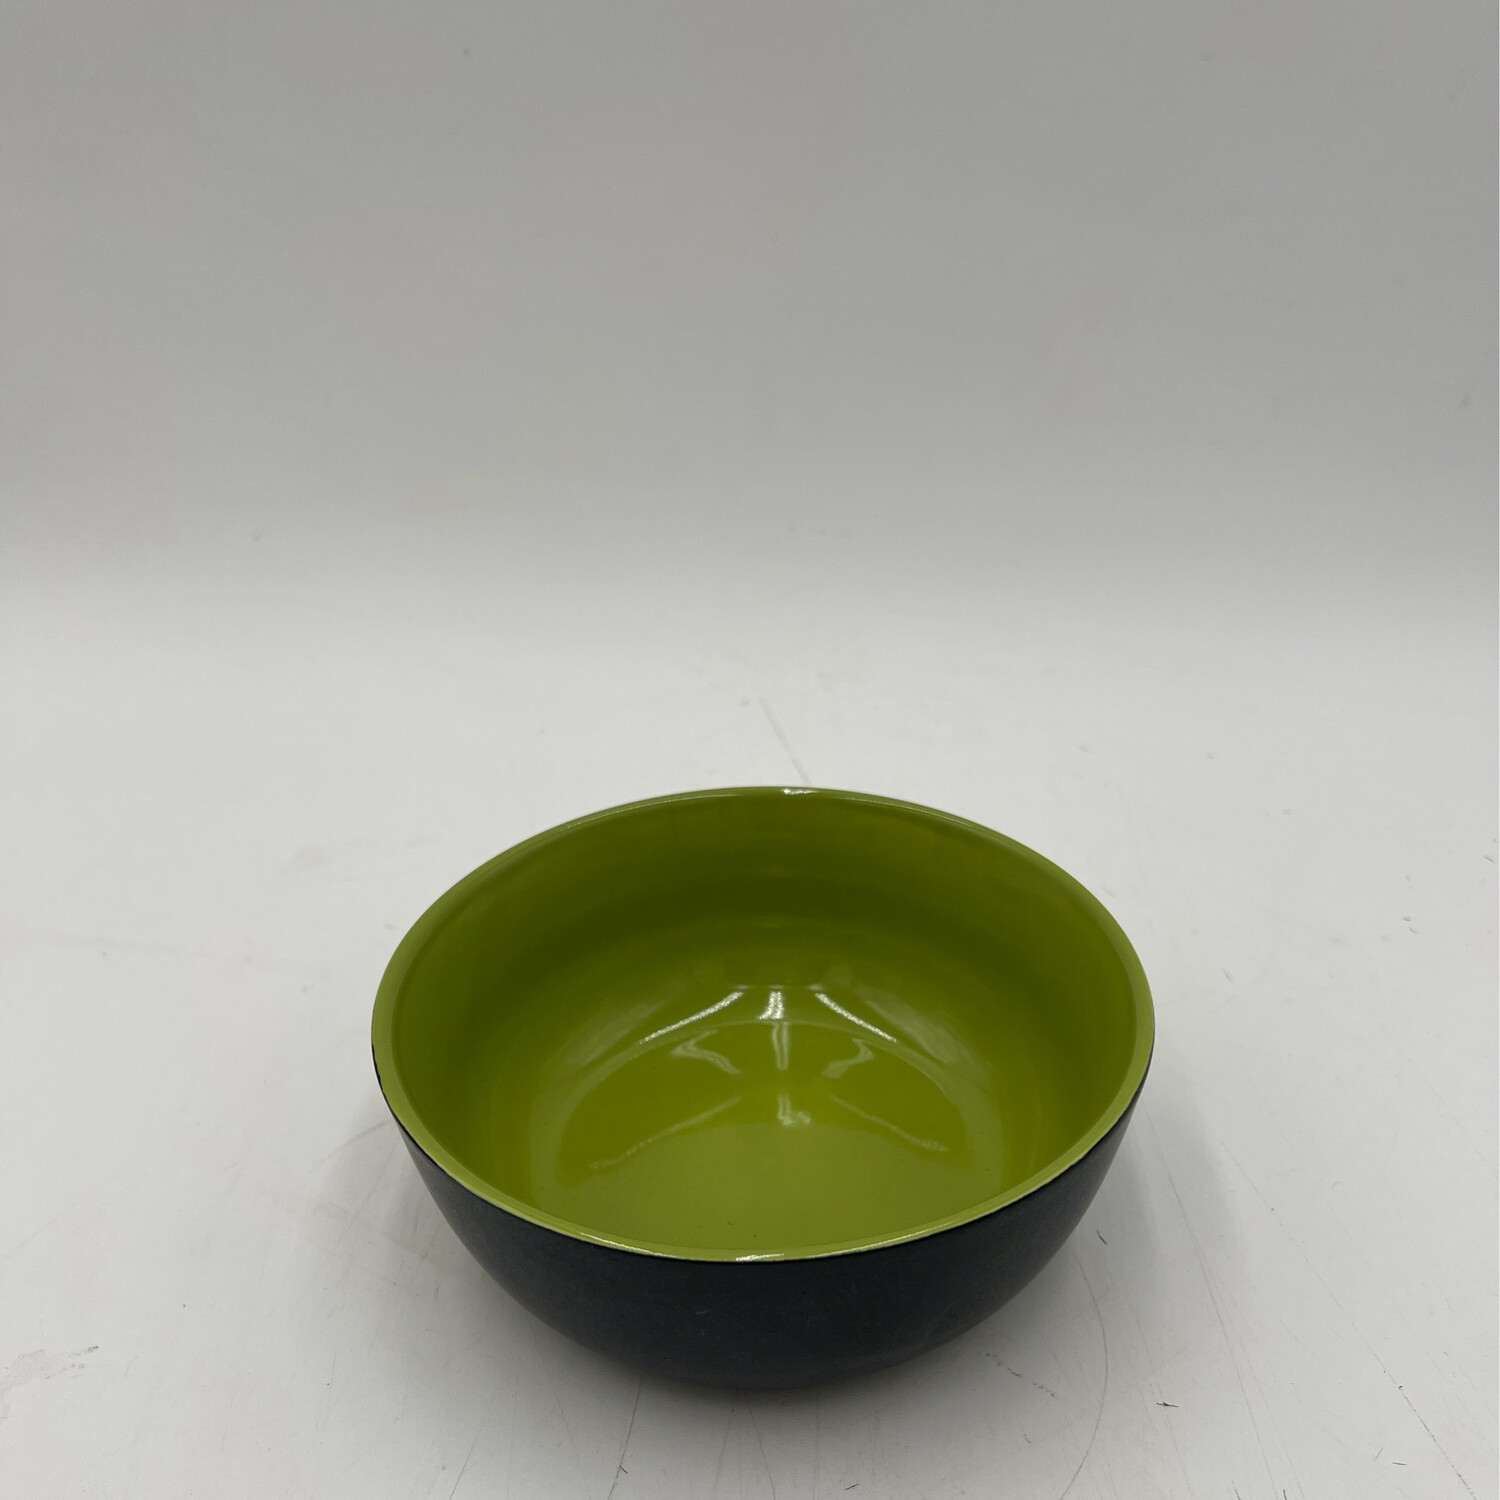 BLACK AND GREEN BOWL 5.5